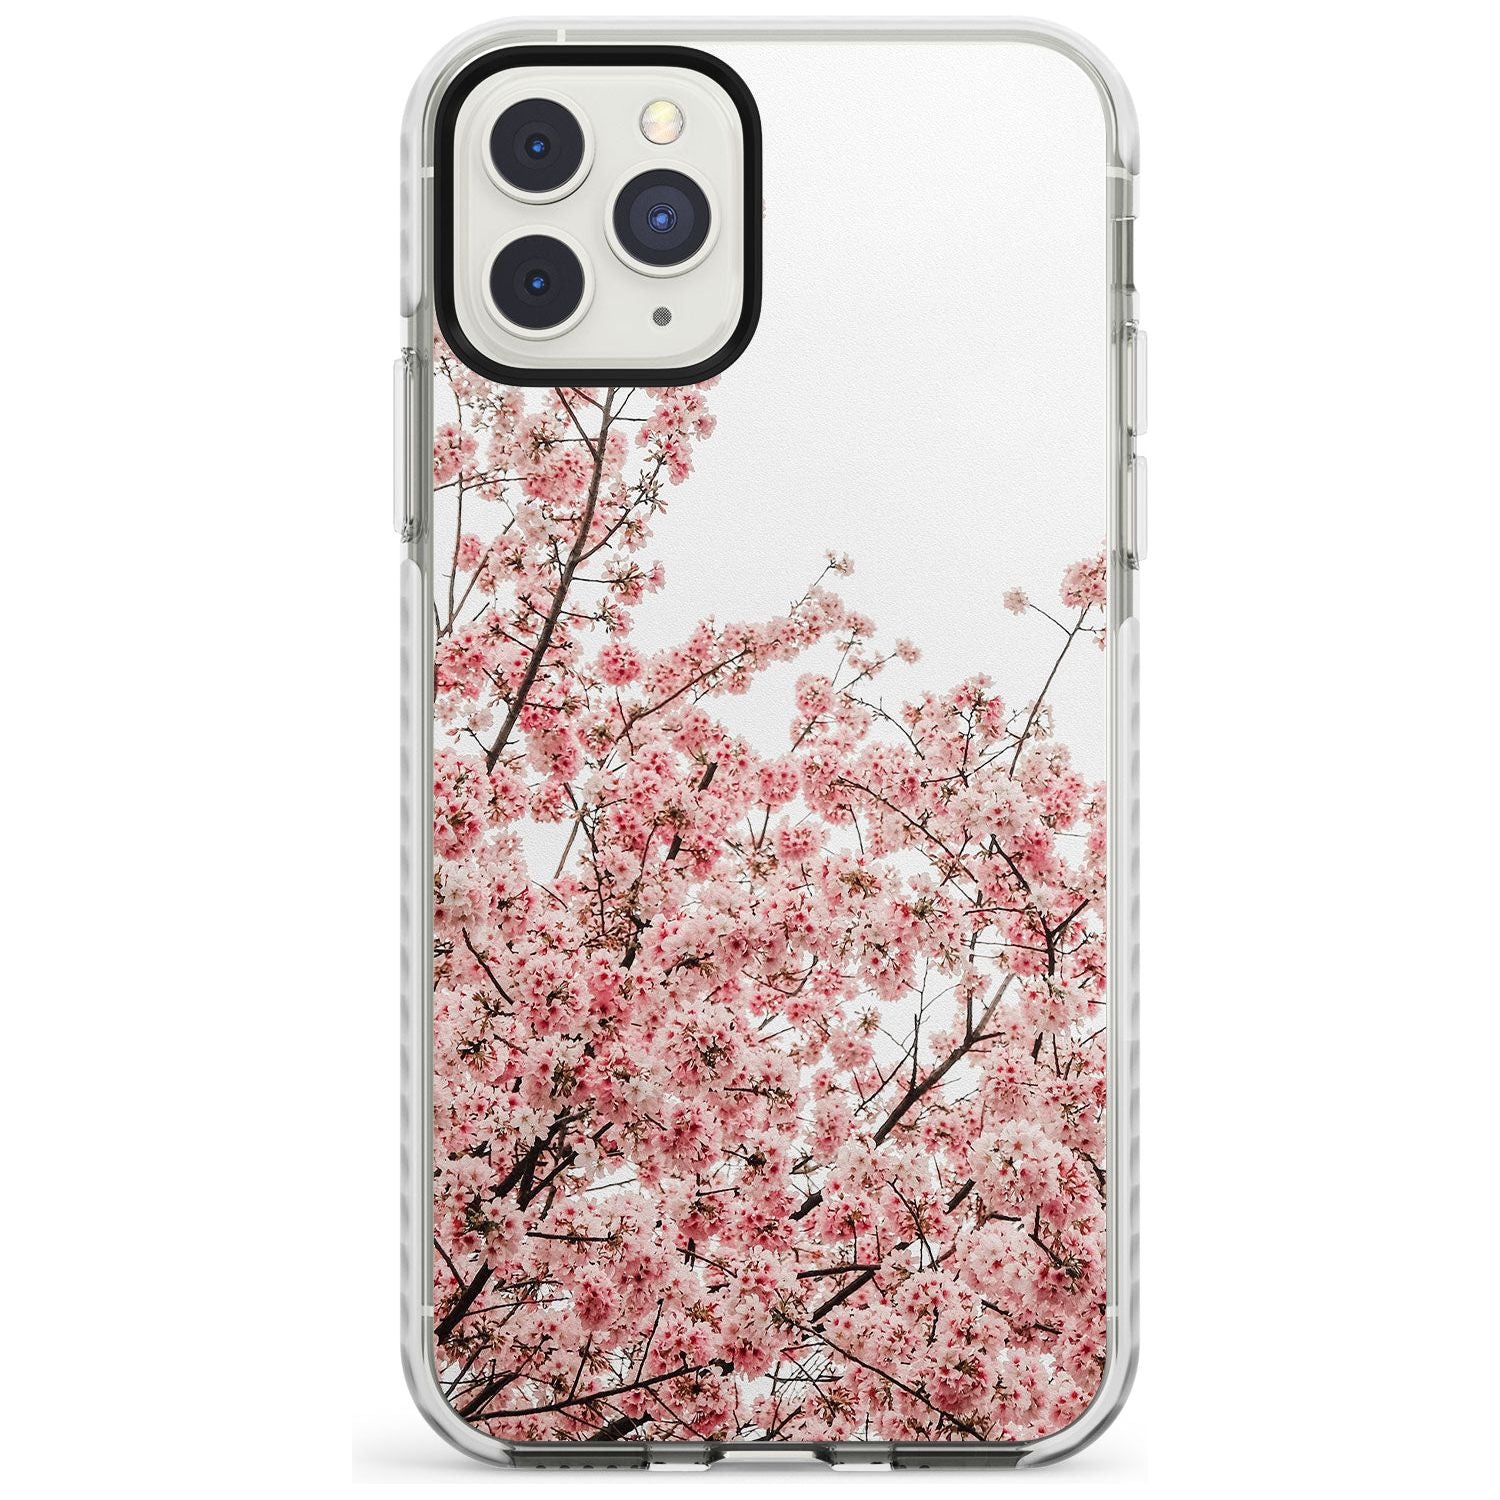 Cherry Blossoms - Real Floral Photographs Impact Phone Case for iPhone 11 Pro Max